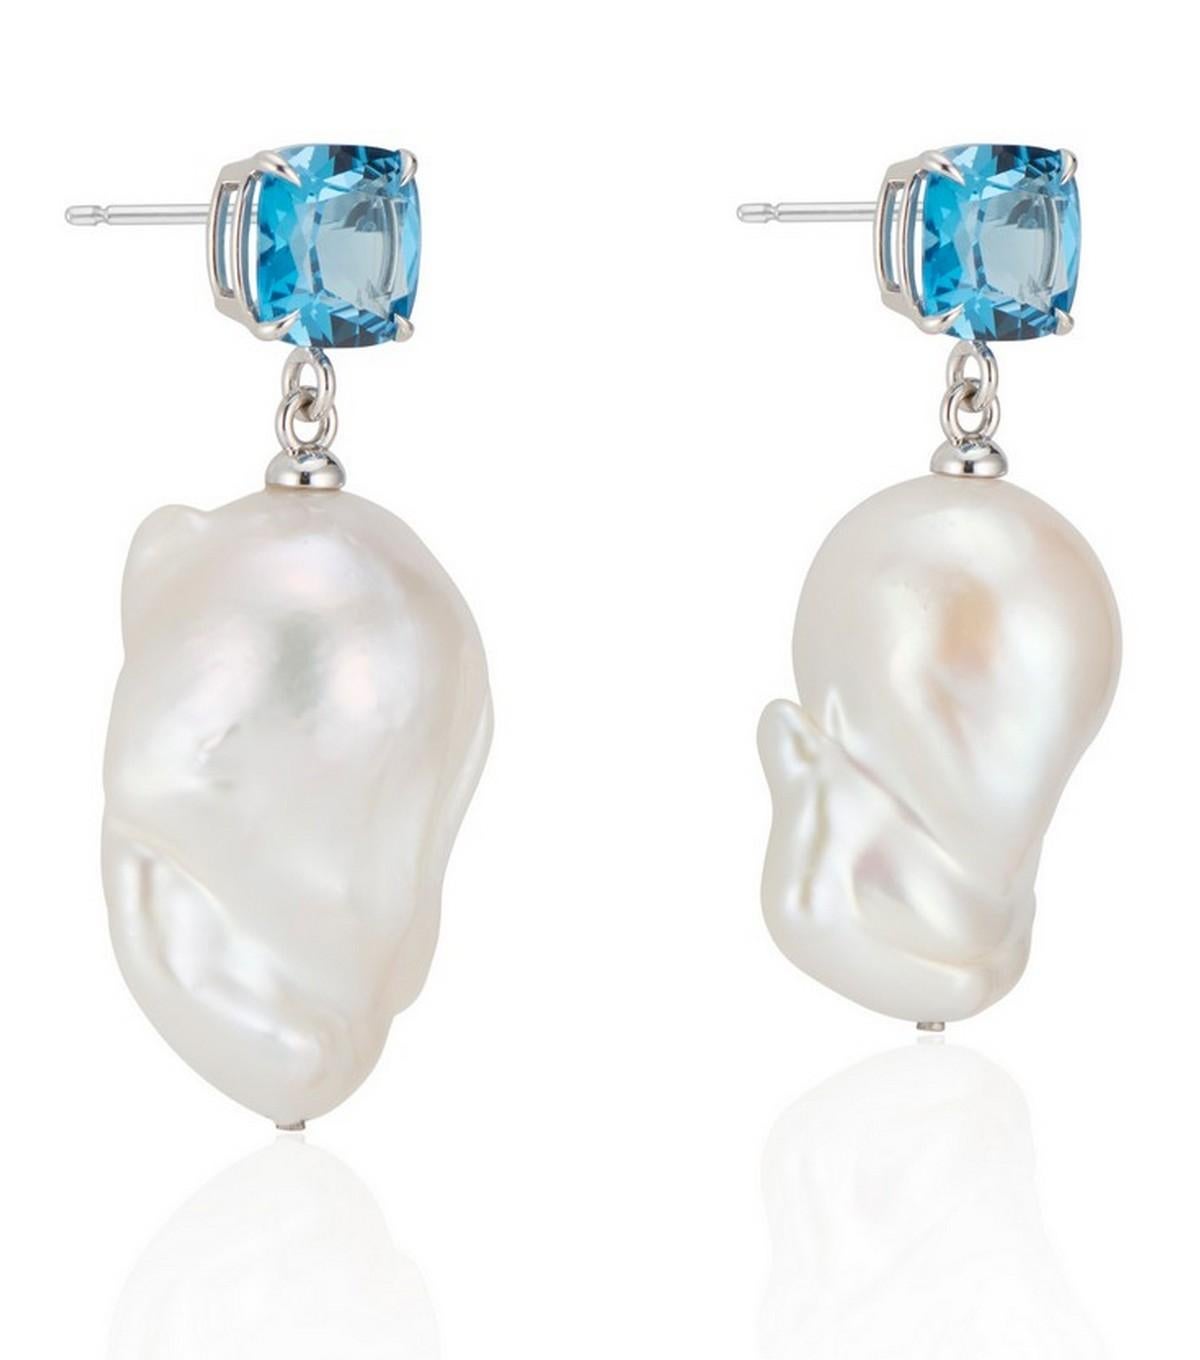 A Striking Cushion Cut London Blue Topaz combined with a luminous natural white baroque pearl drop to create a romantic show stopping earring.

Set in a high polish 14k White gold basket with claw setting to elevate the look.

London Blue Topaz 8mm